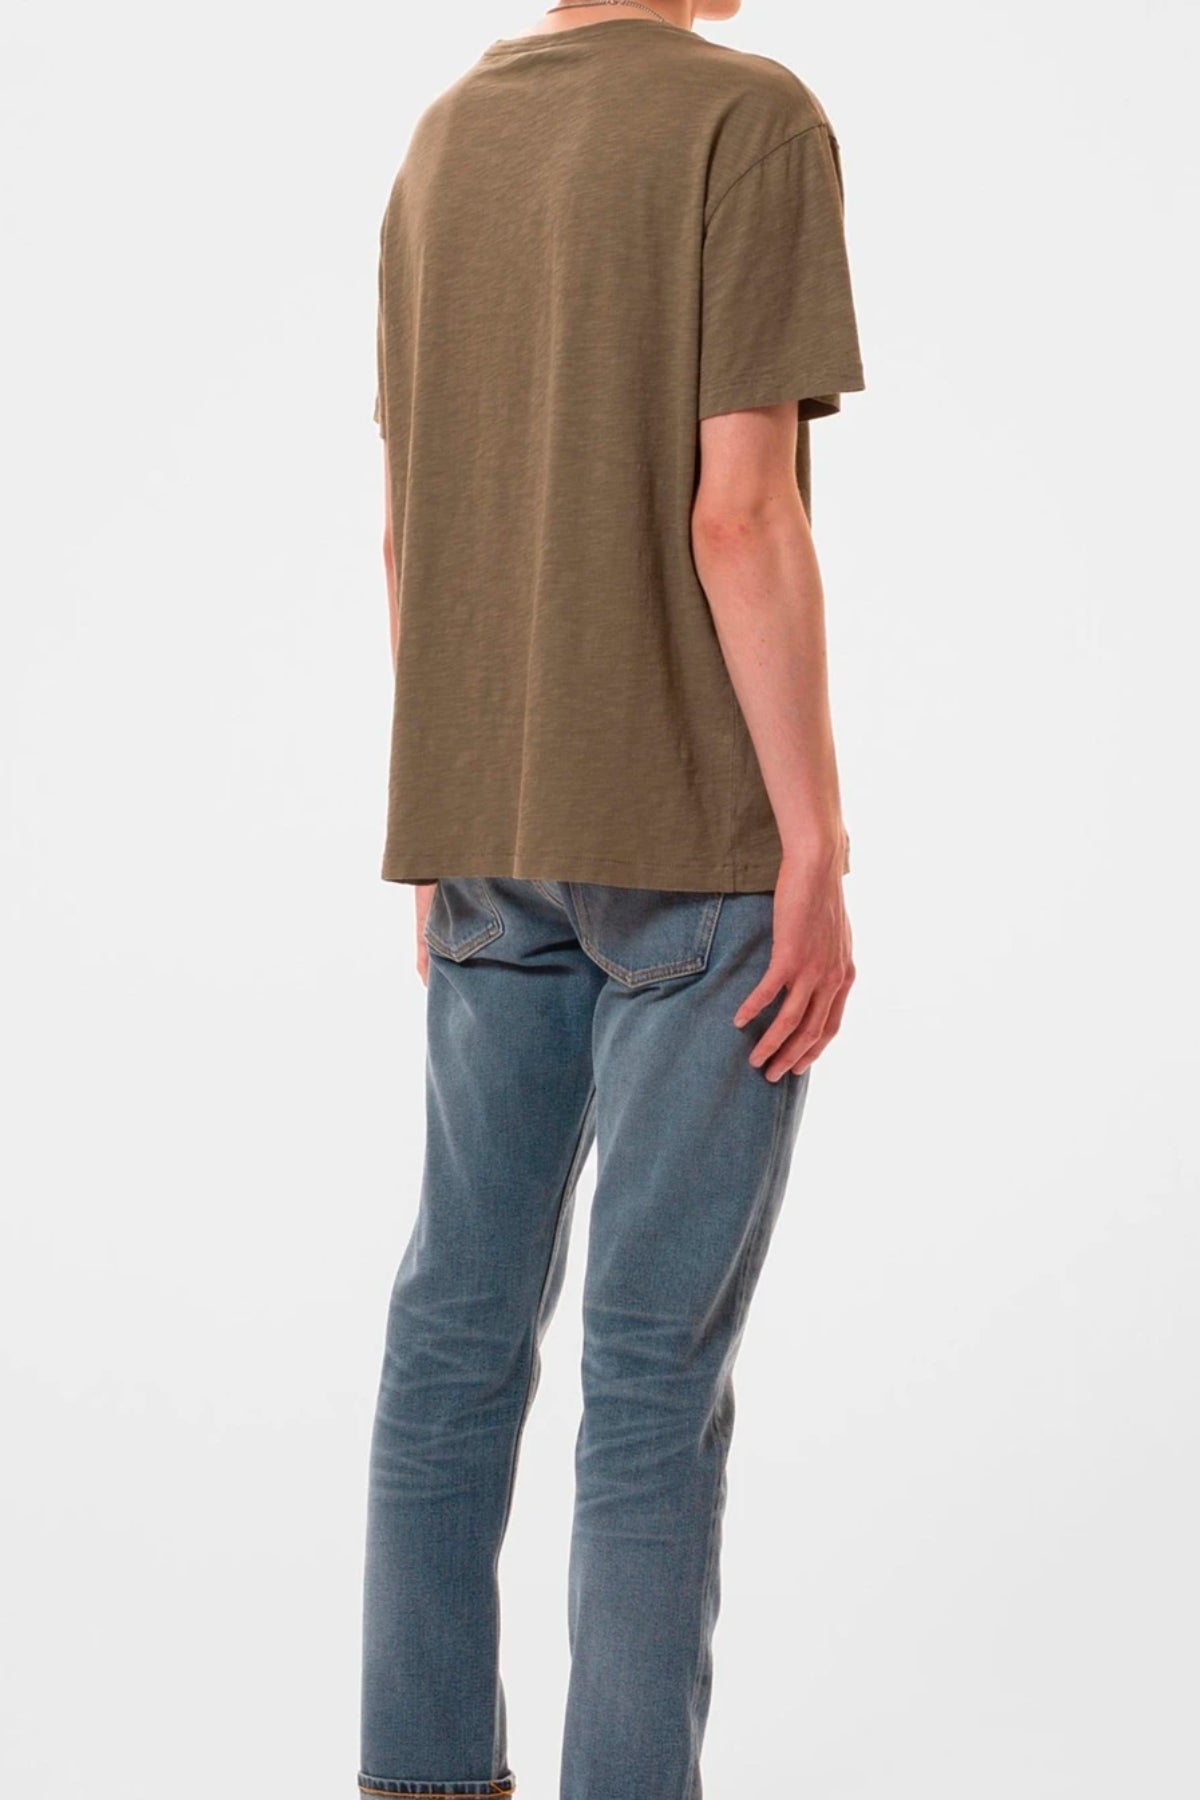 T-shirt Roffe Tee - Nudie Jeans